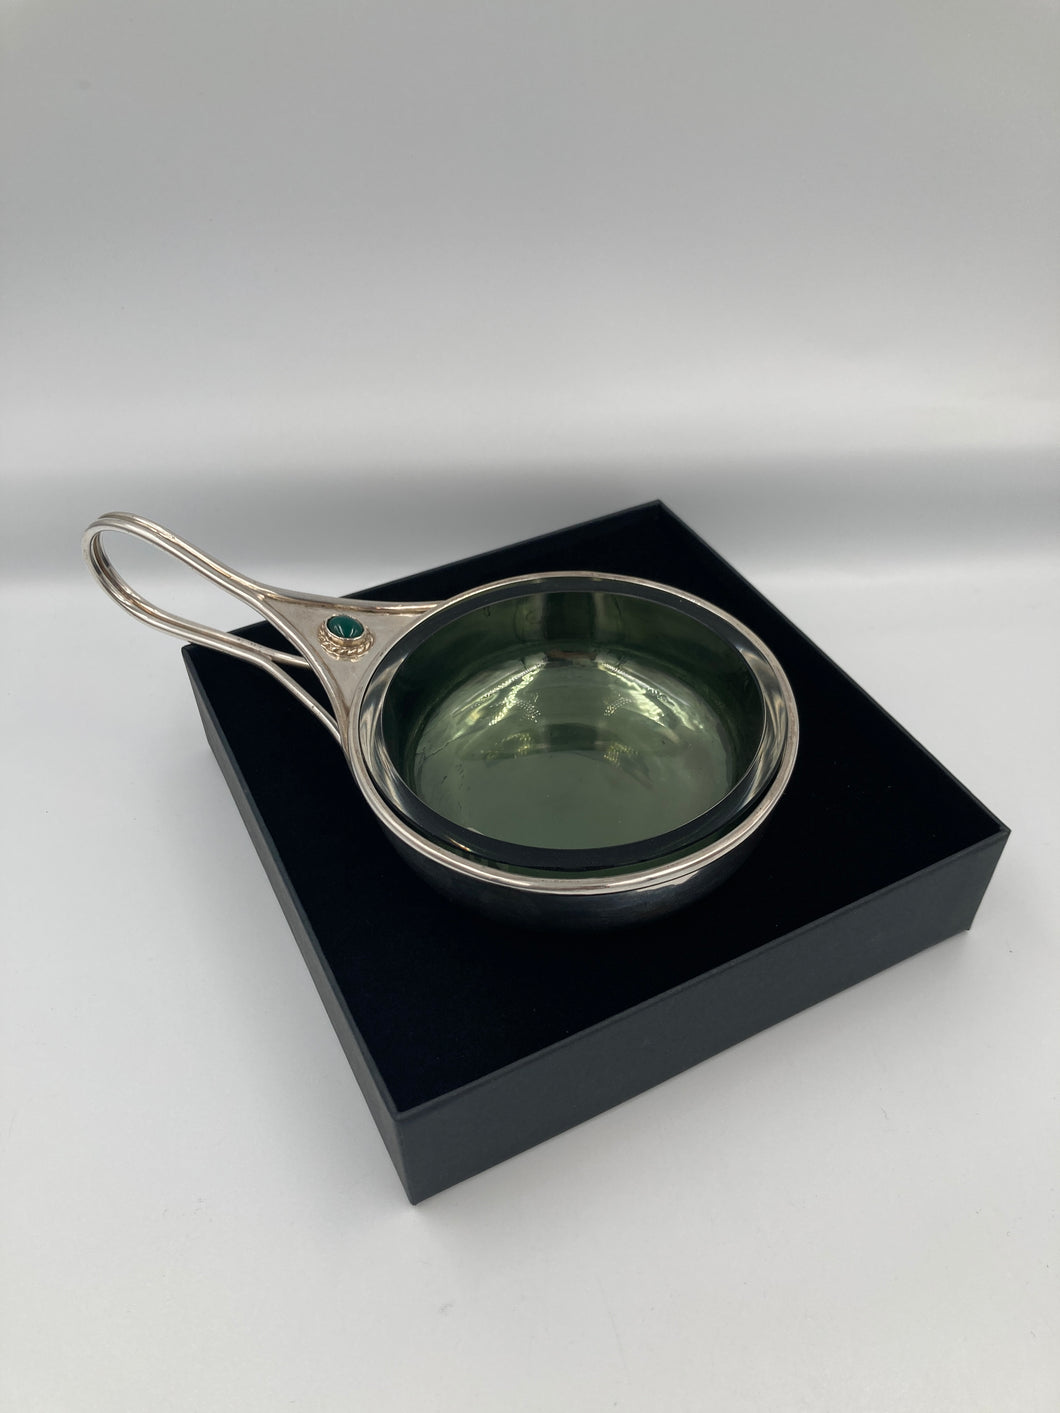 Jam Dish with Green Agate and Glass Dish by Hart Silversmiths